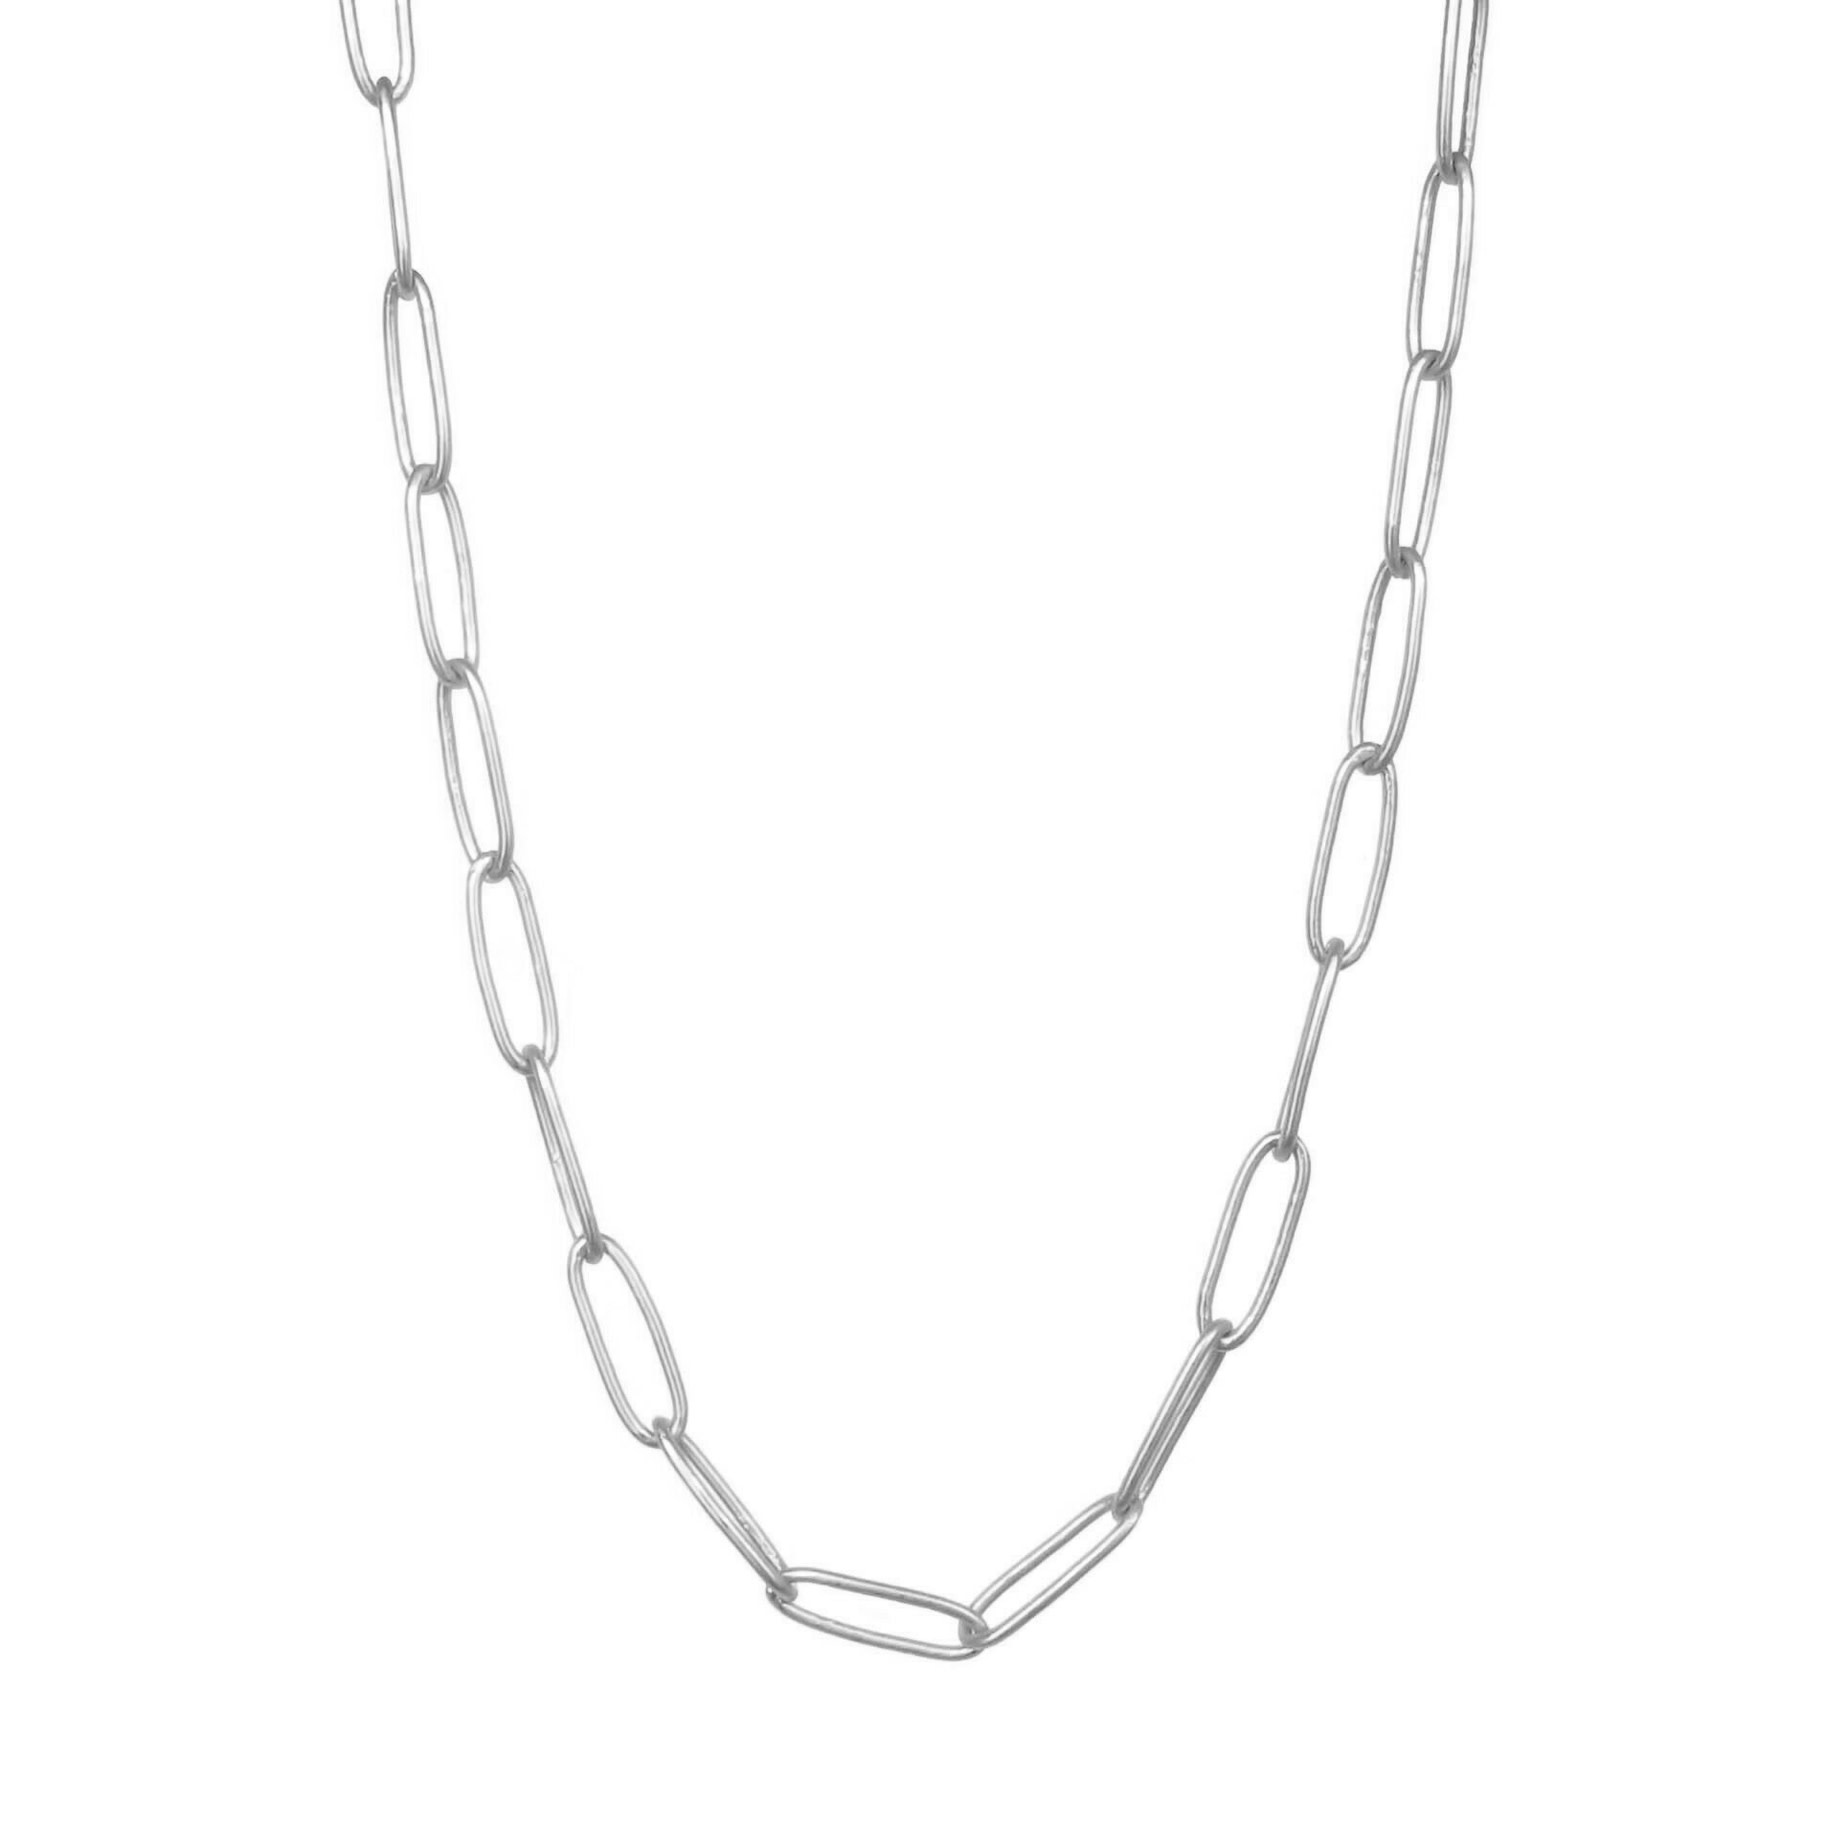 Stowaway Jewelry Medium Paperclip Chain Necklace